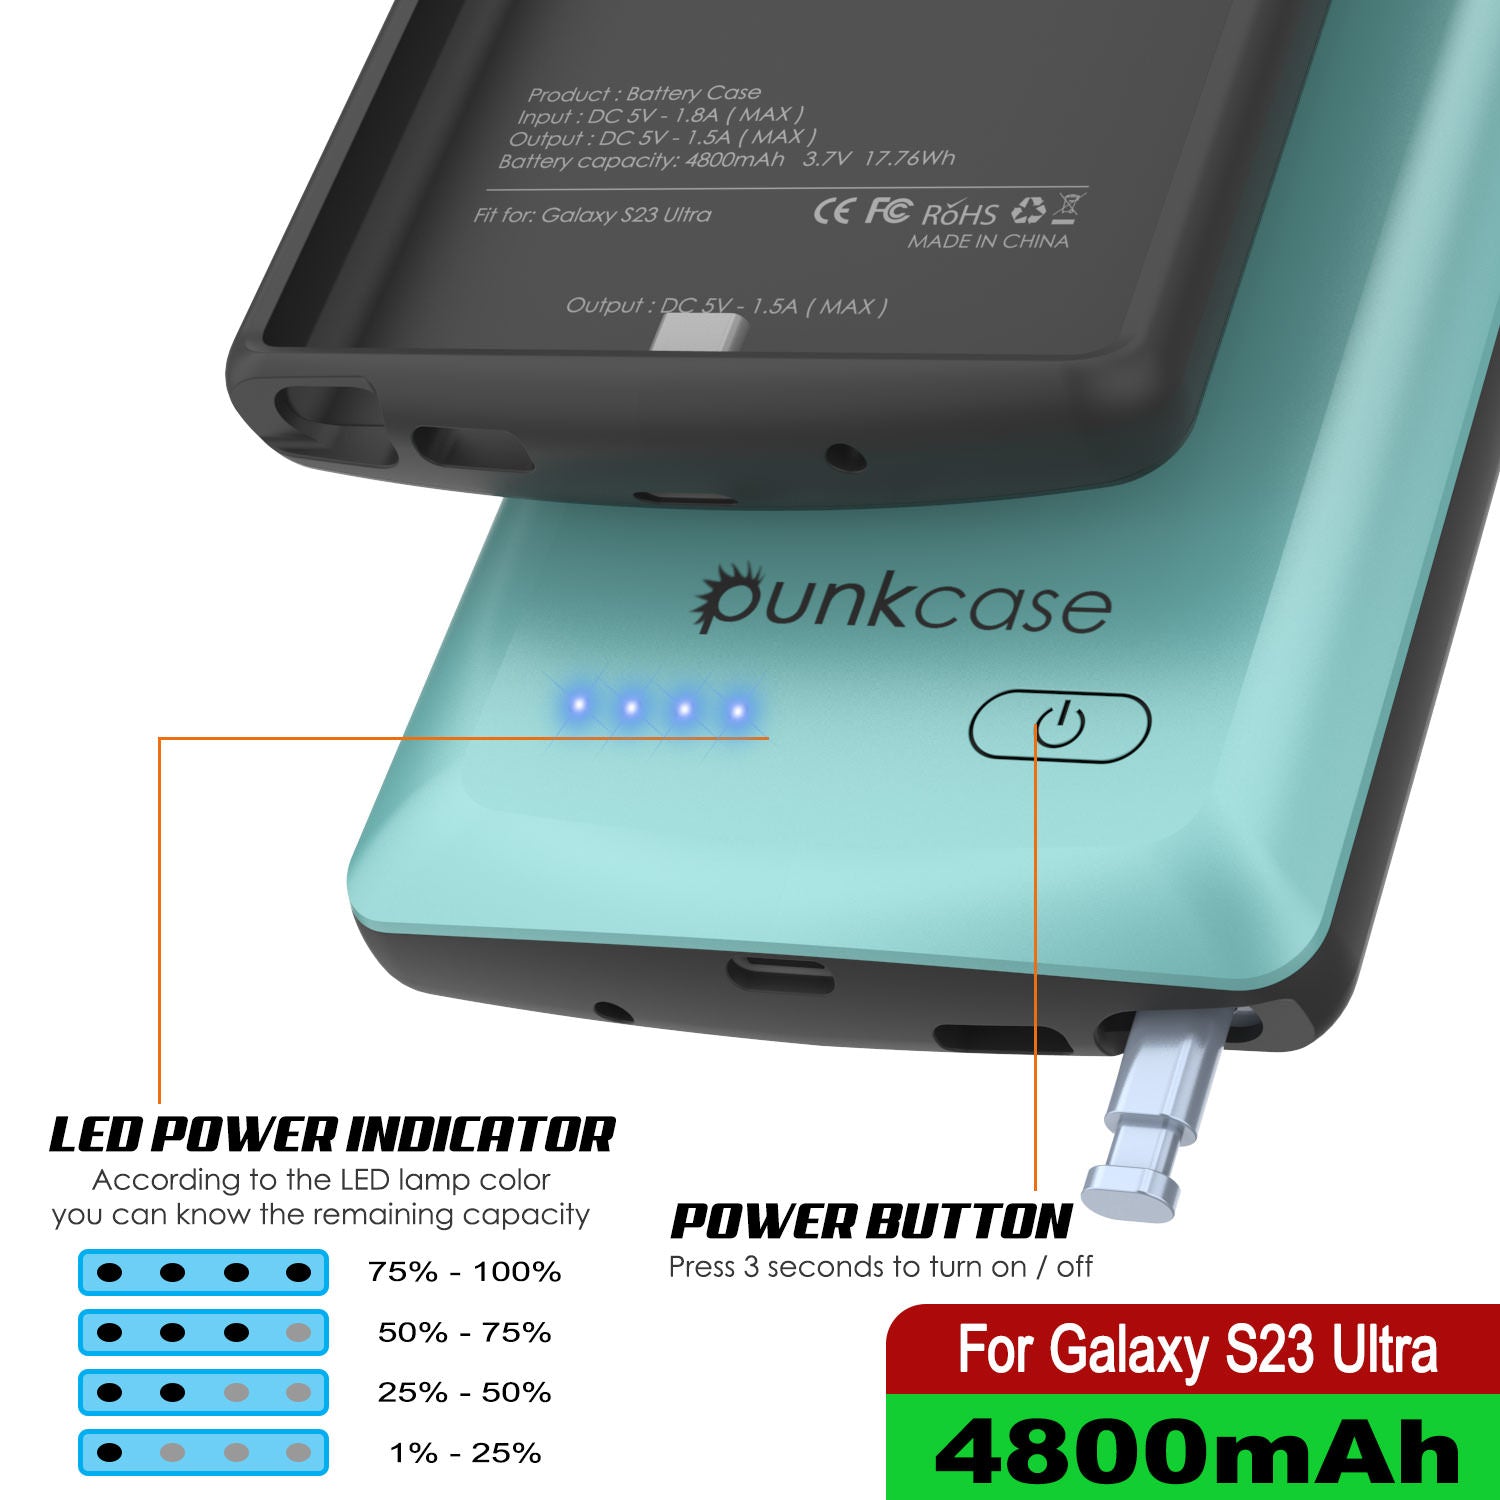 PunkJuice S24+ Plus Battery Case Teal - Portable Charging Power Juice Bank with 5000mAh